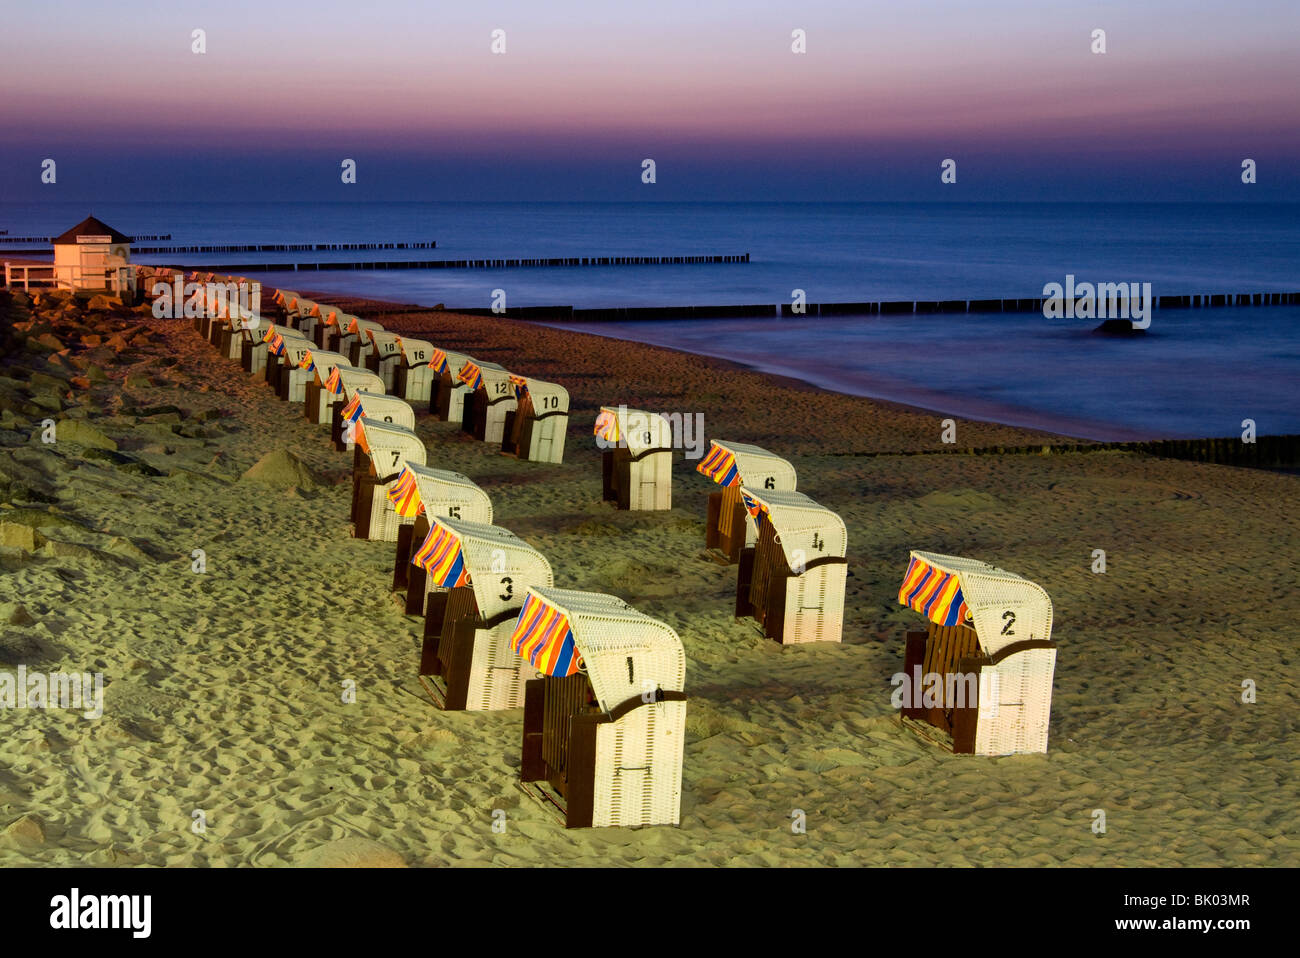 Beach chairs in the evening at the beach of Kuehlungsborn, Germany, Baltic Sea, Mecklenburg-Western Pomerania. Stock Photo